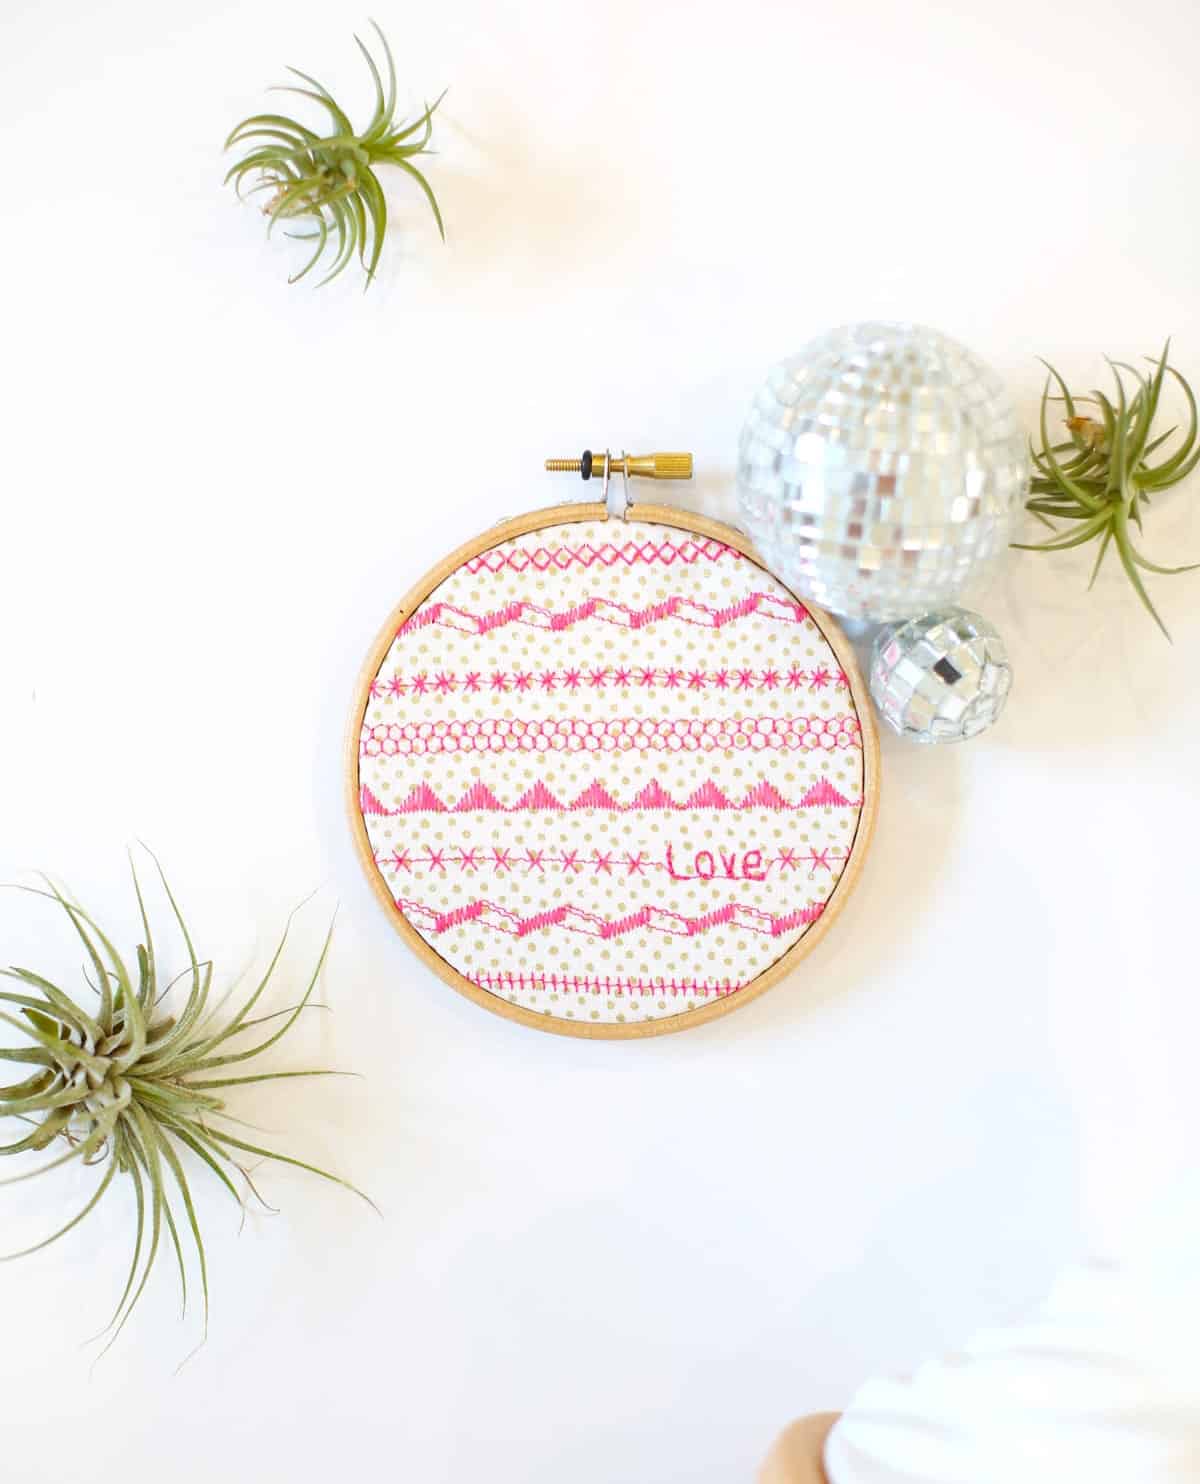 faux-embroidered hanging wall art